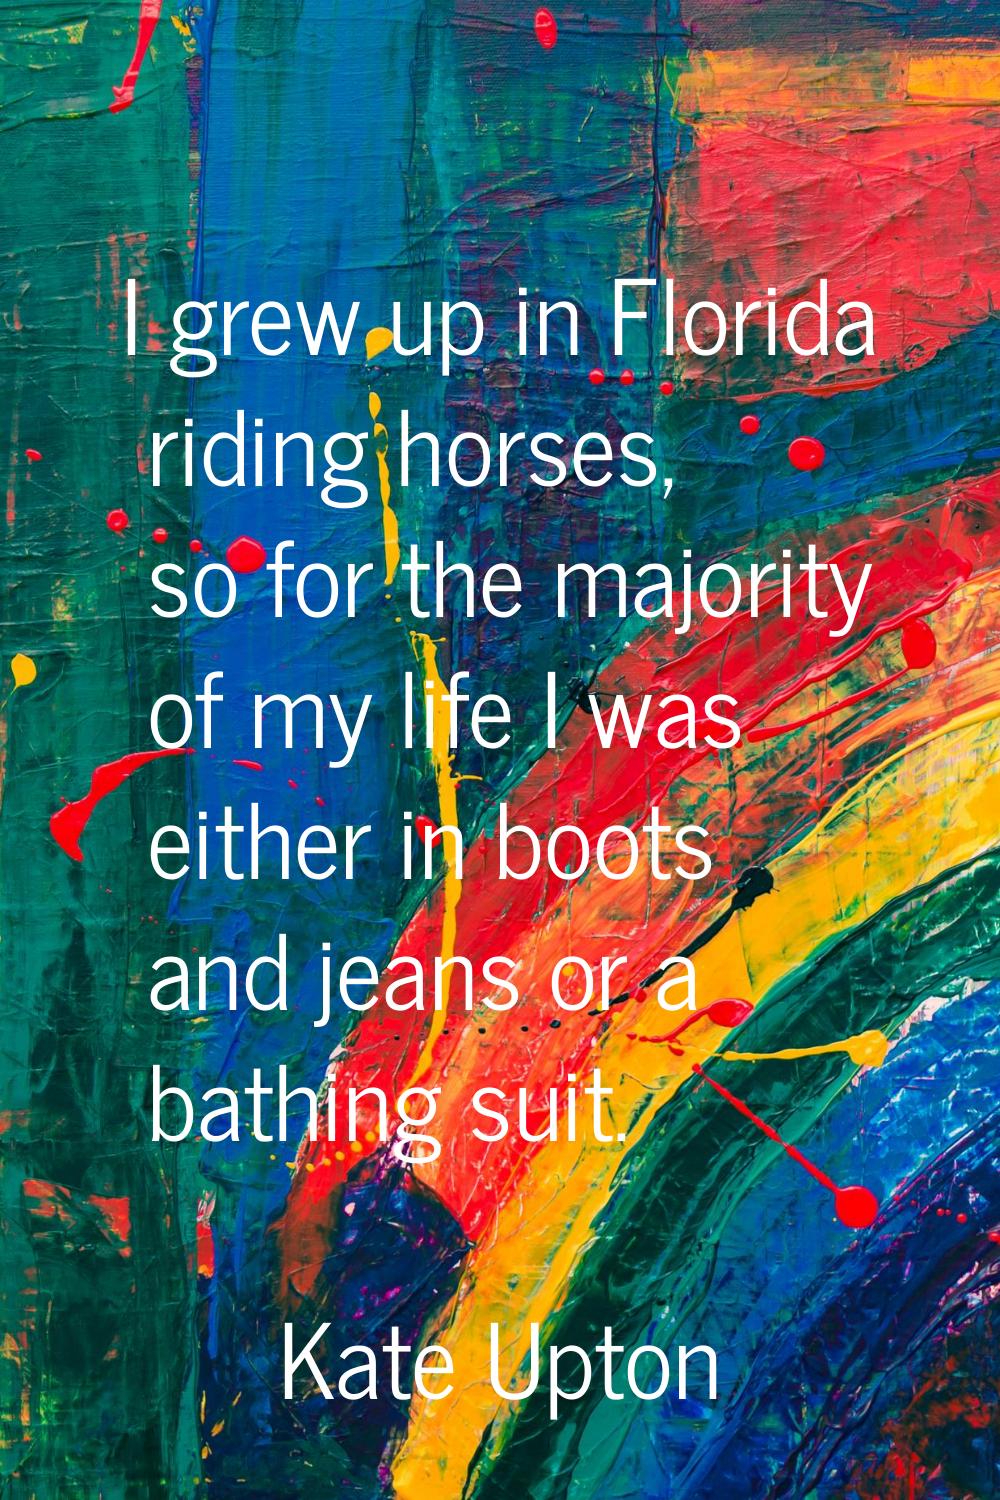 I grew up in Florida riding horses, so for the majority of my life I was either in boots and jeans 